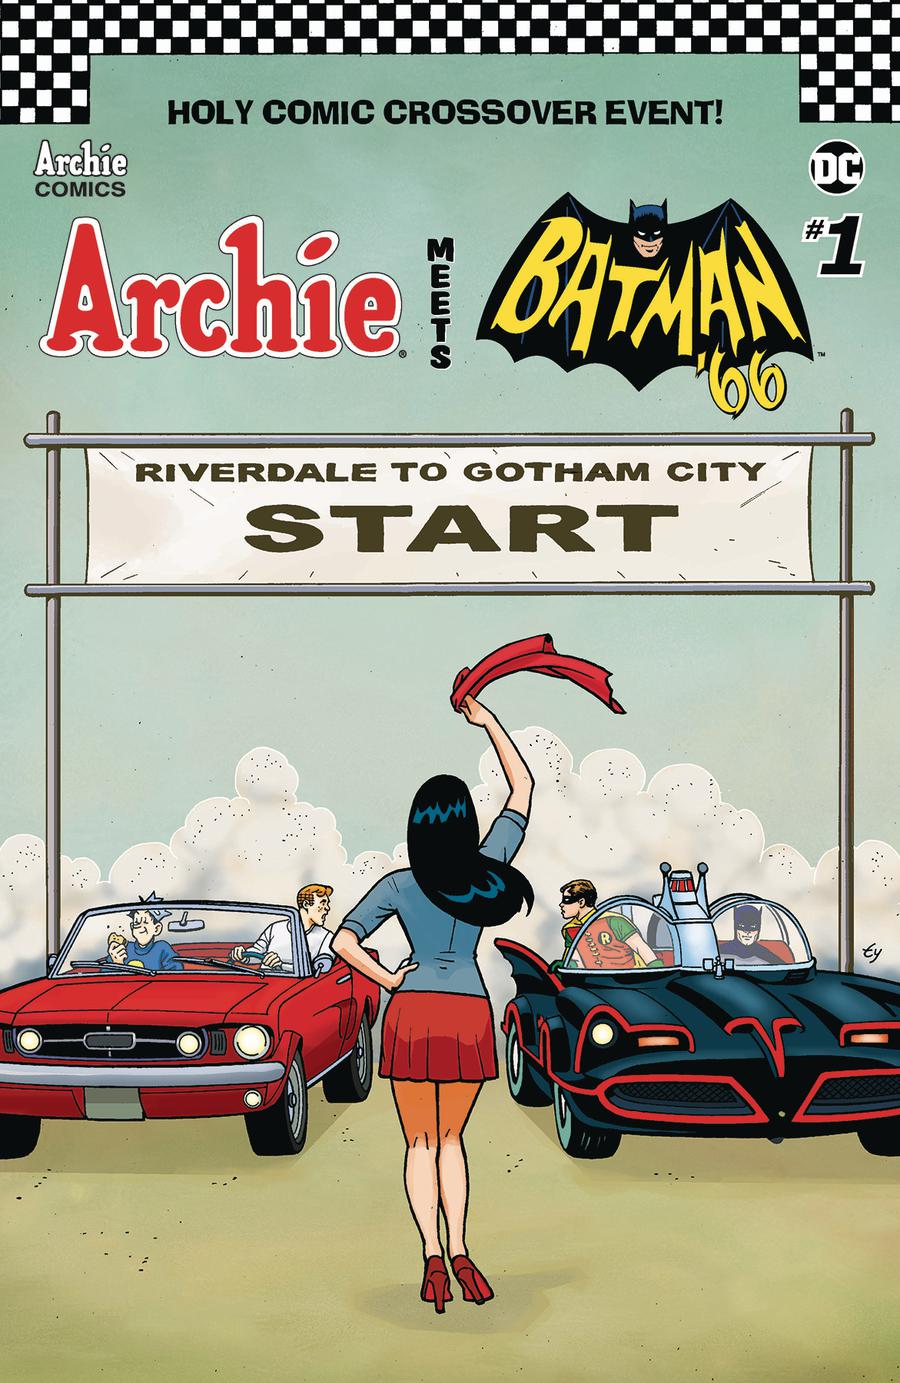 Archie Meets Batman 66 #1 Cover F Variant Ty Templeton Cover